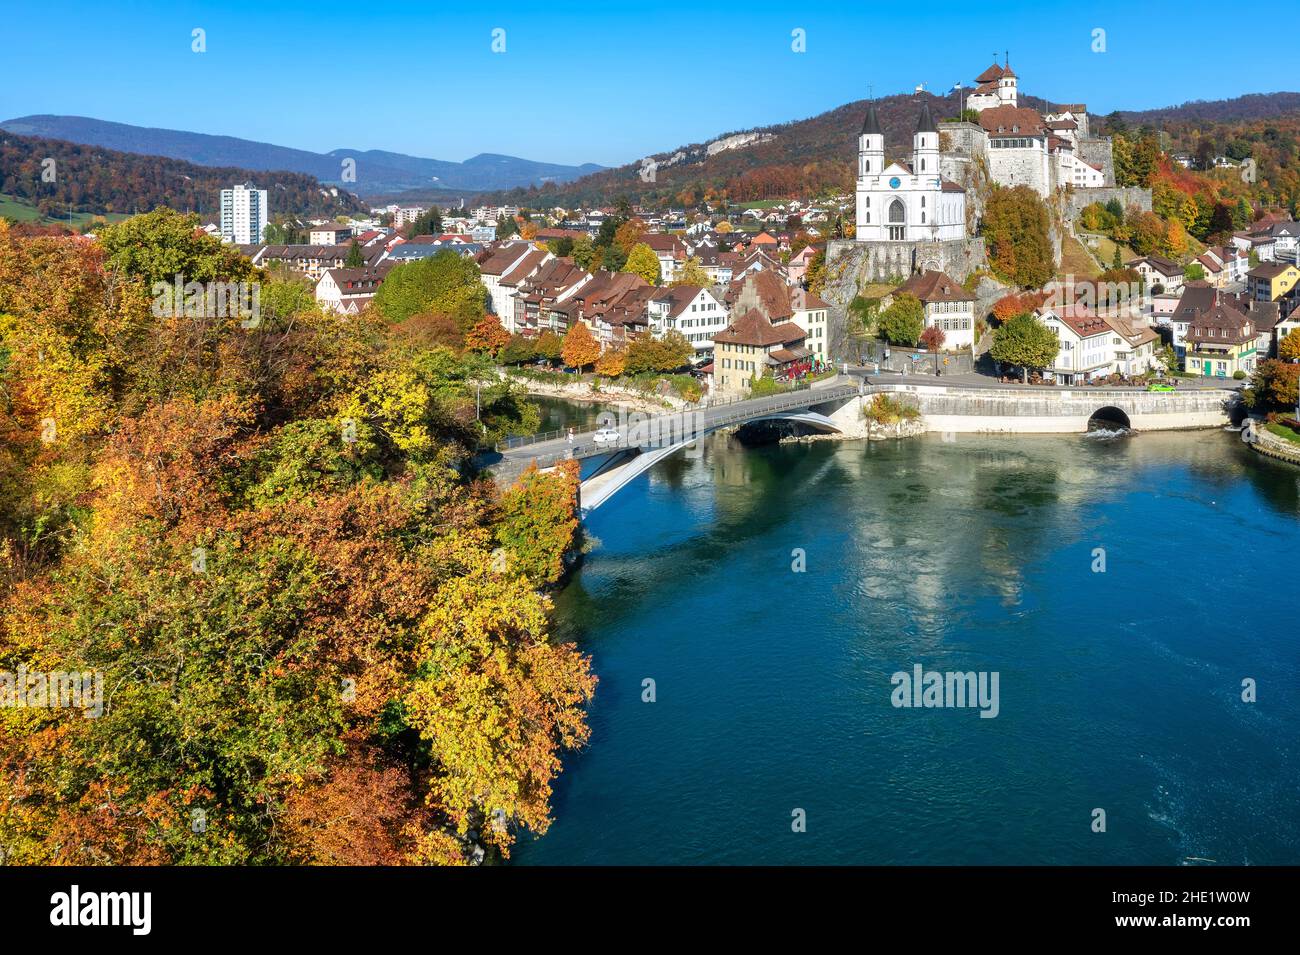 Historical Aarburg Old town and castle on Aare river in canton Aargau, central Switzerland, on a bright autumn day Stock Photo